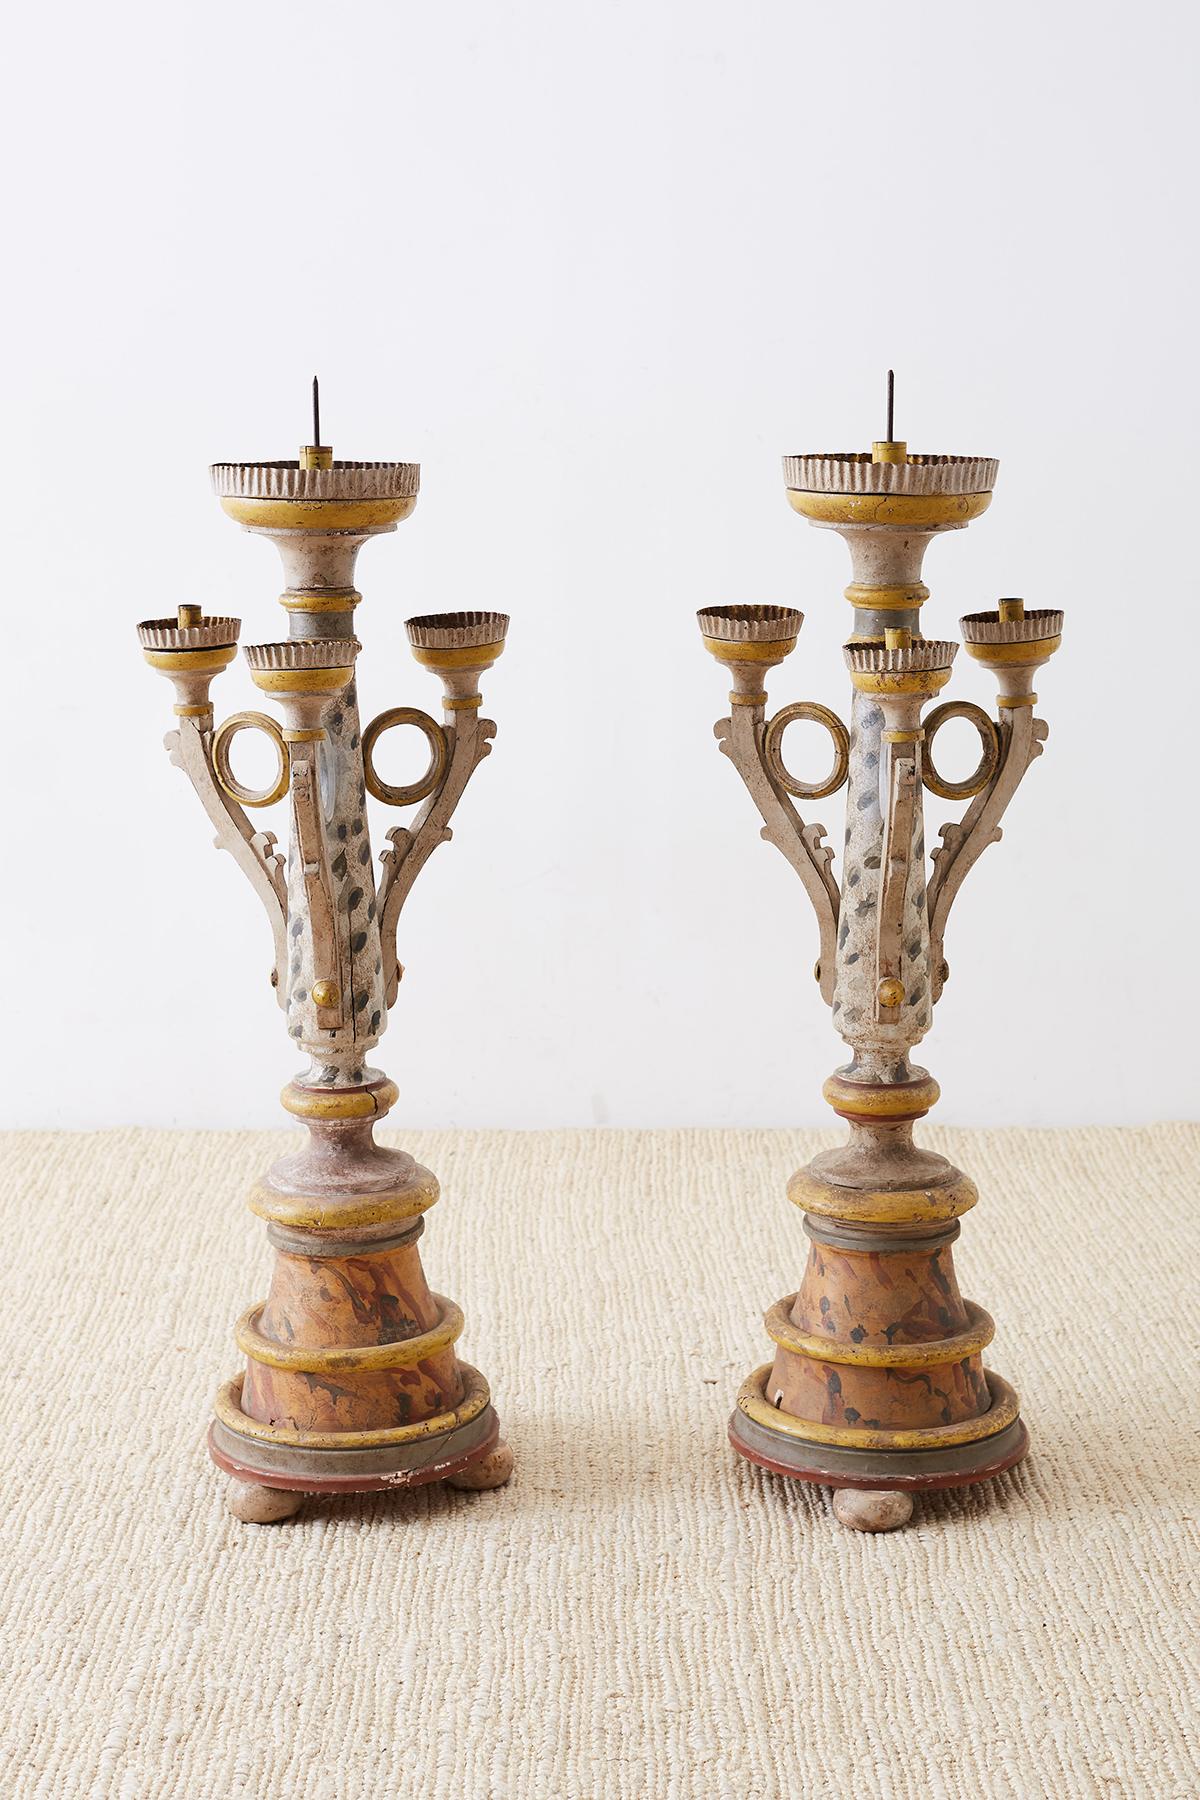 Polychrome pair of Italian carved three arm candelabras or candle holders. Features a decorative painted frame with yellow and red over a grey background done in a whimsical style. Distressed and faded patina with lots of character. Each arm has a